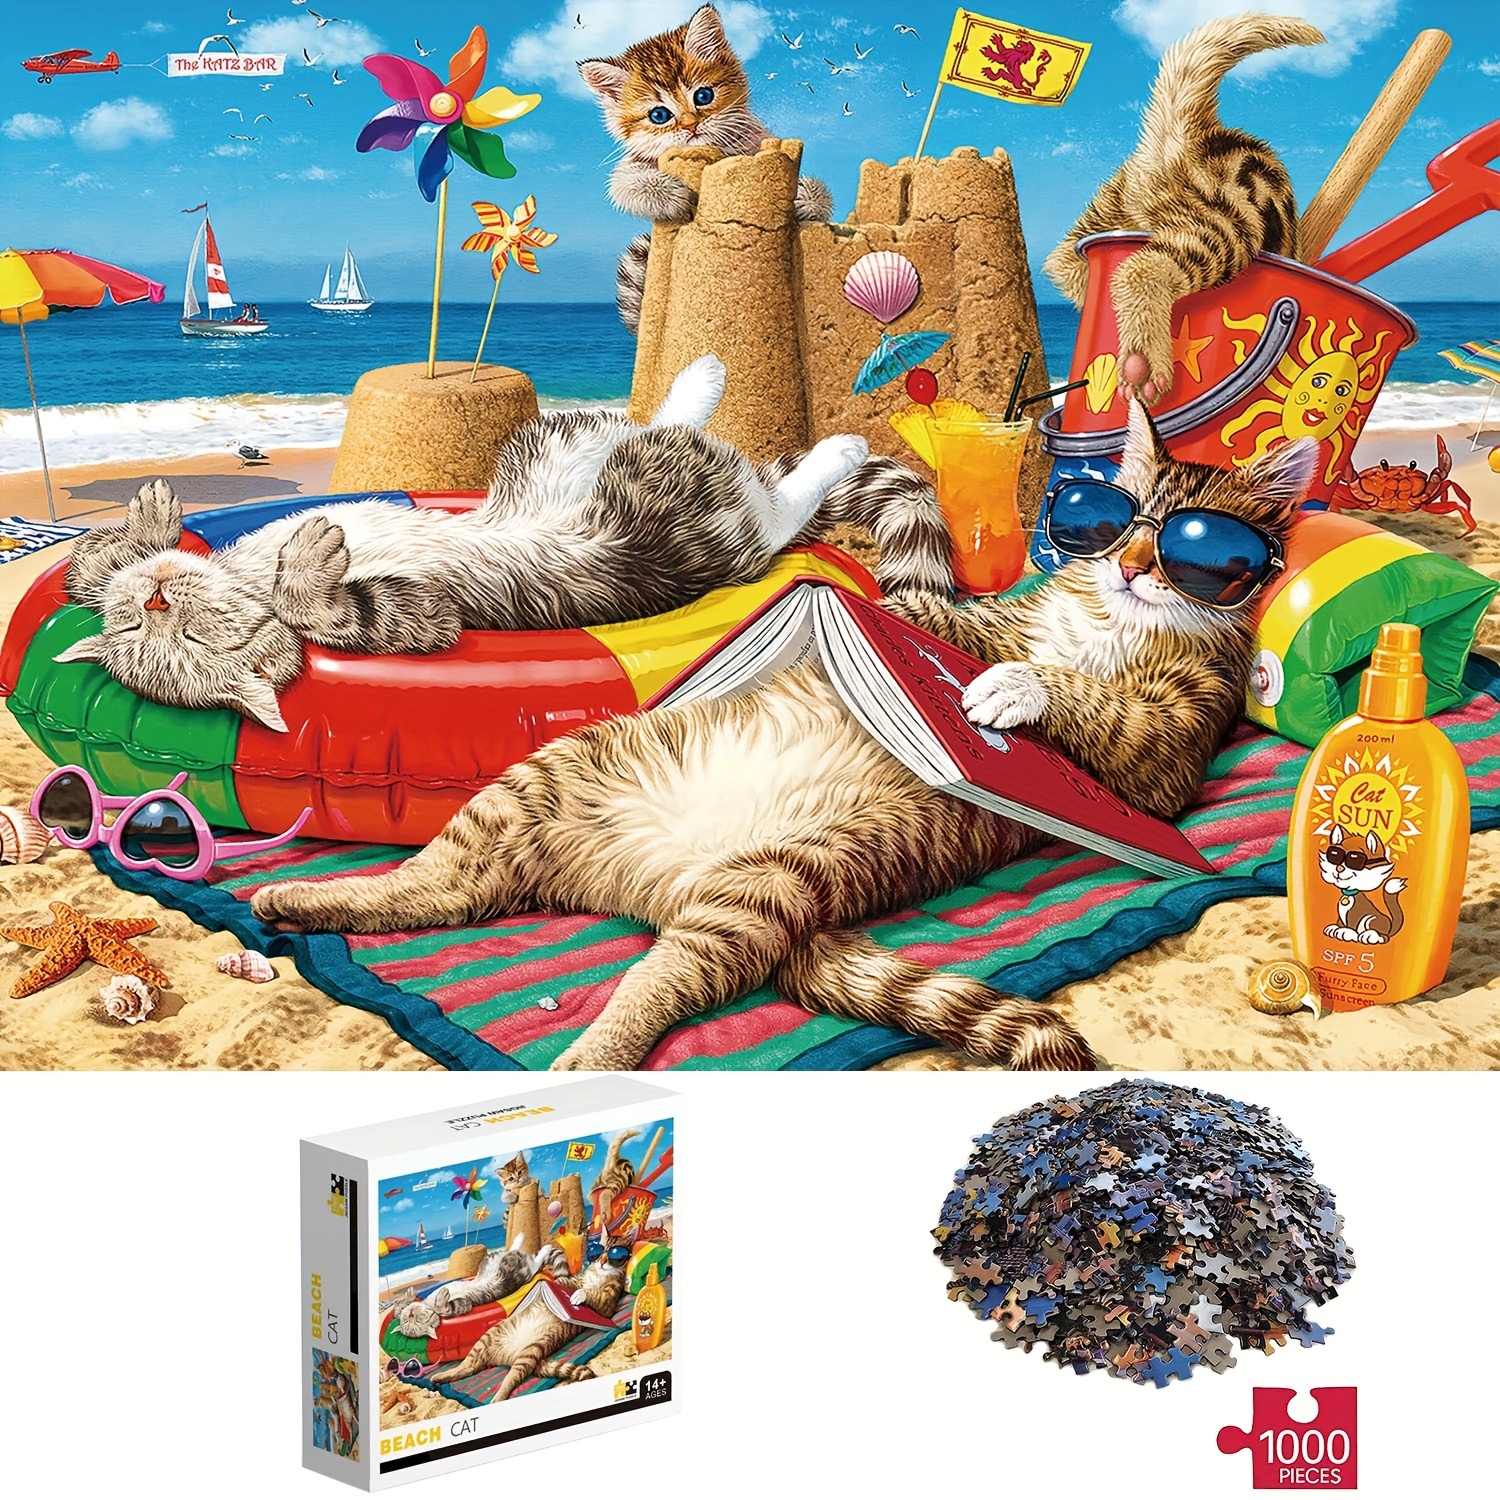 

1000pcs Beach Cats Puzzles, Thick And Durable Seamless Jigsaw Puzzles For Adults Fun Family Challenging Puzzles For Birthday, Christmas, Halloween, Thanksgiving, Easter